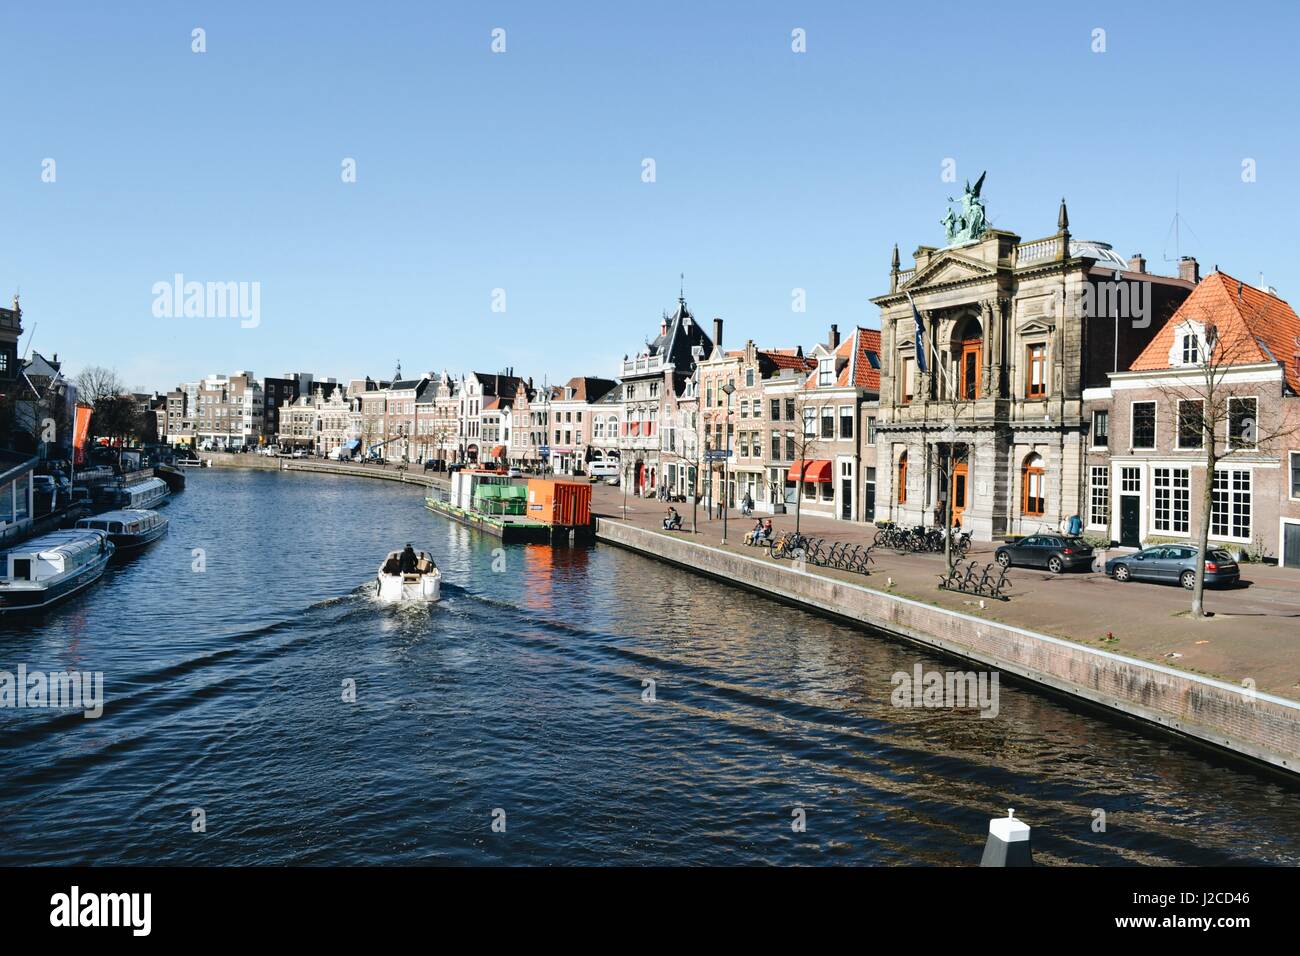 City centre of Haarlem, the Netherlands Stock Photo